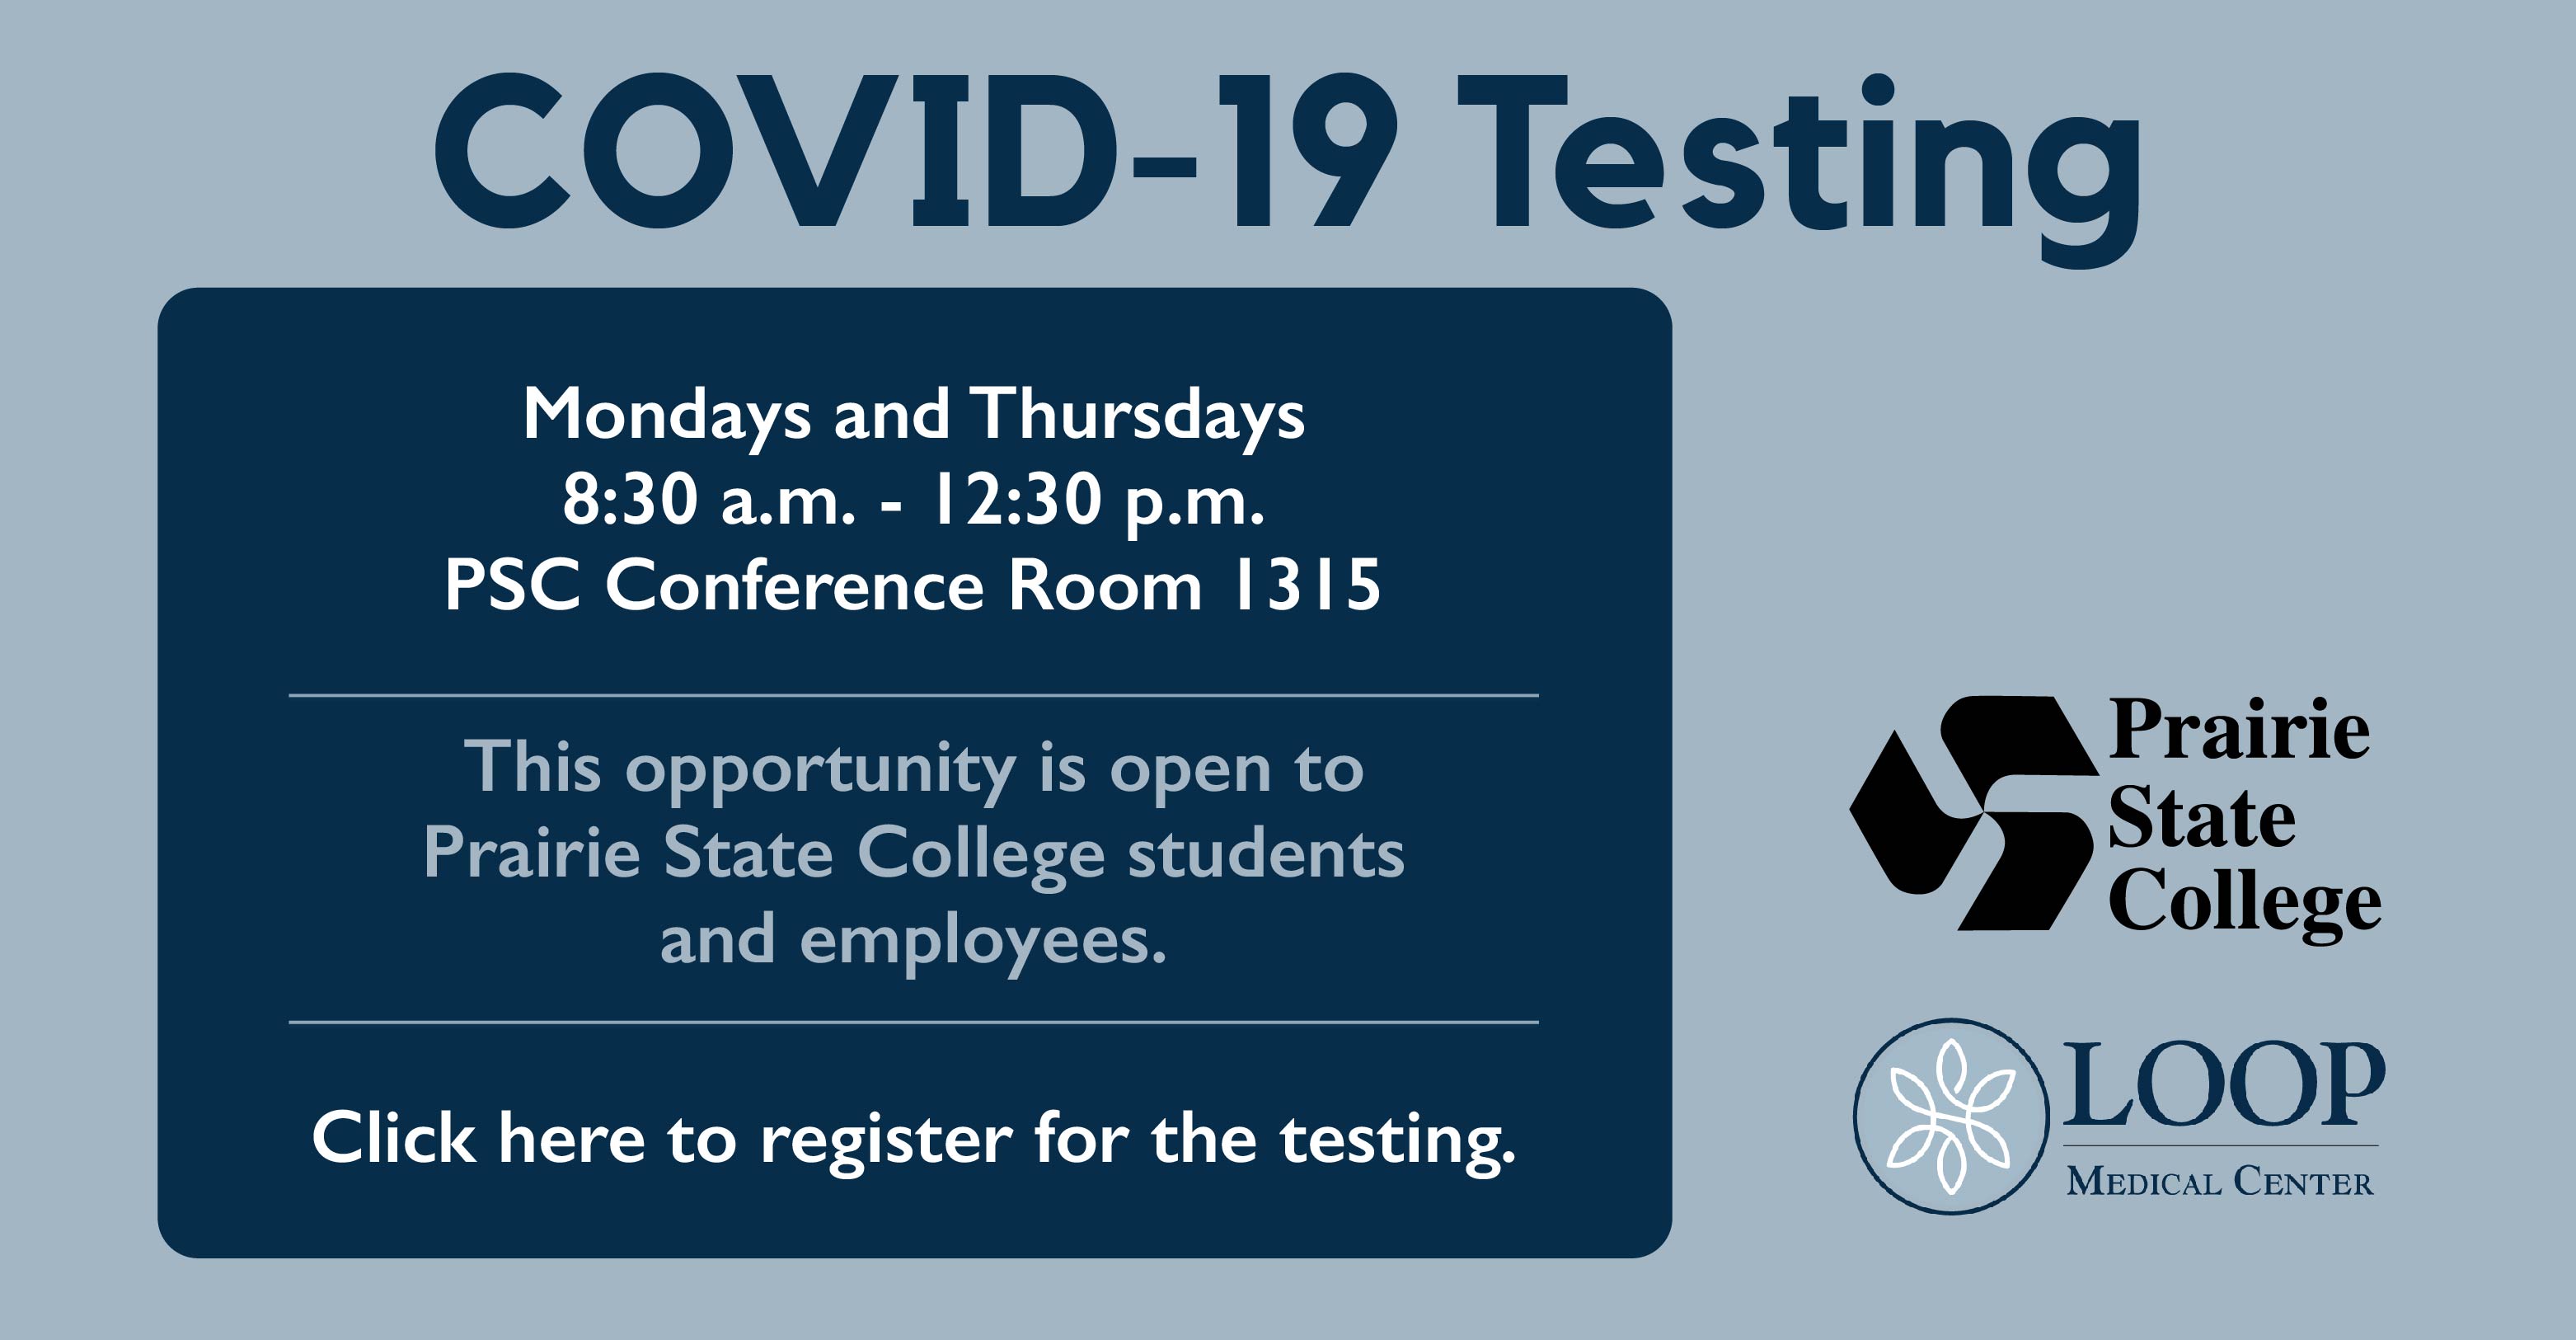 COVID-19 Testing is available at Prairie State College